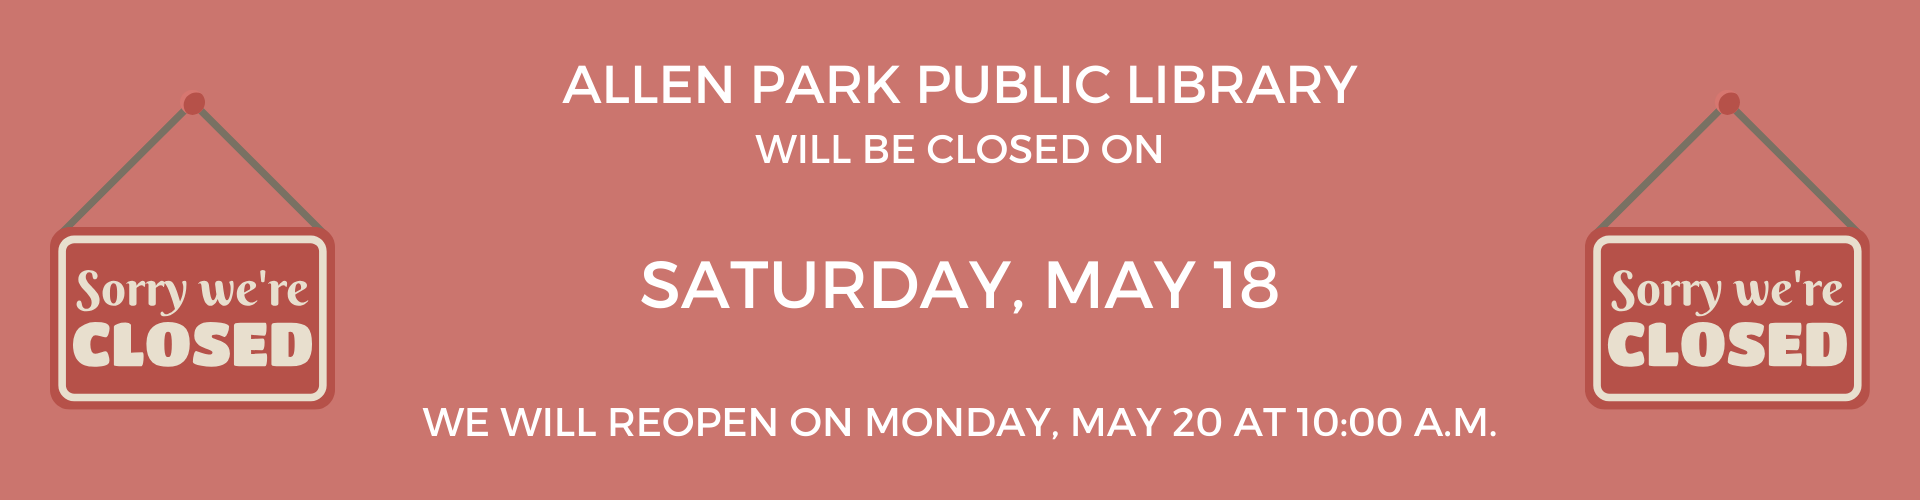 Allen Park Public Library will be closed on Saturday, May 18. We will reopen on Monday, May 20 at 10:00 a.m.